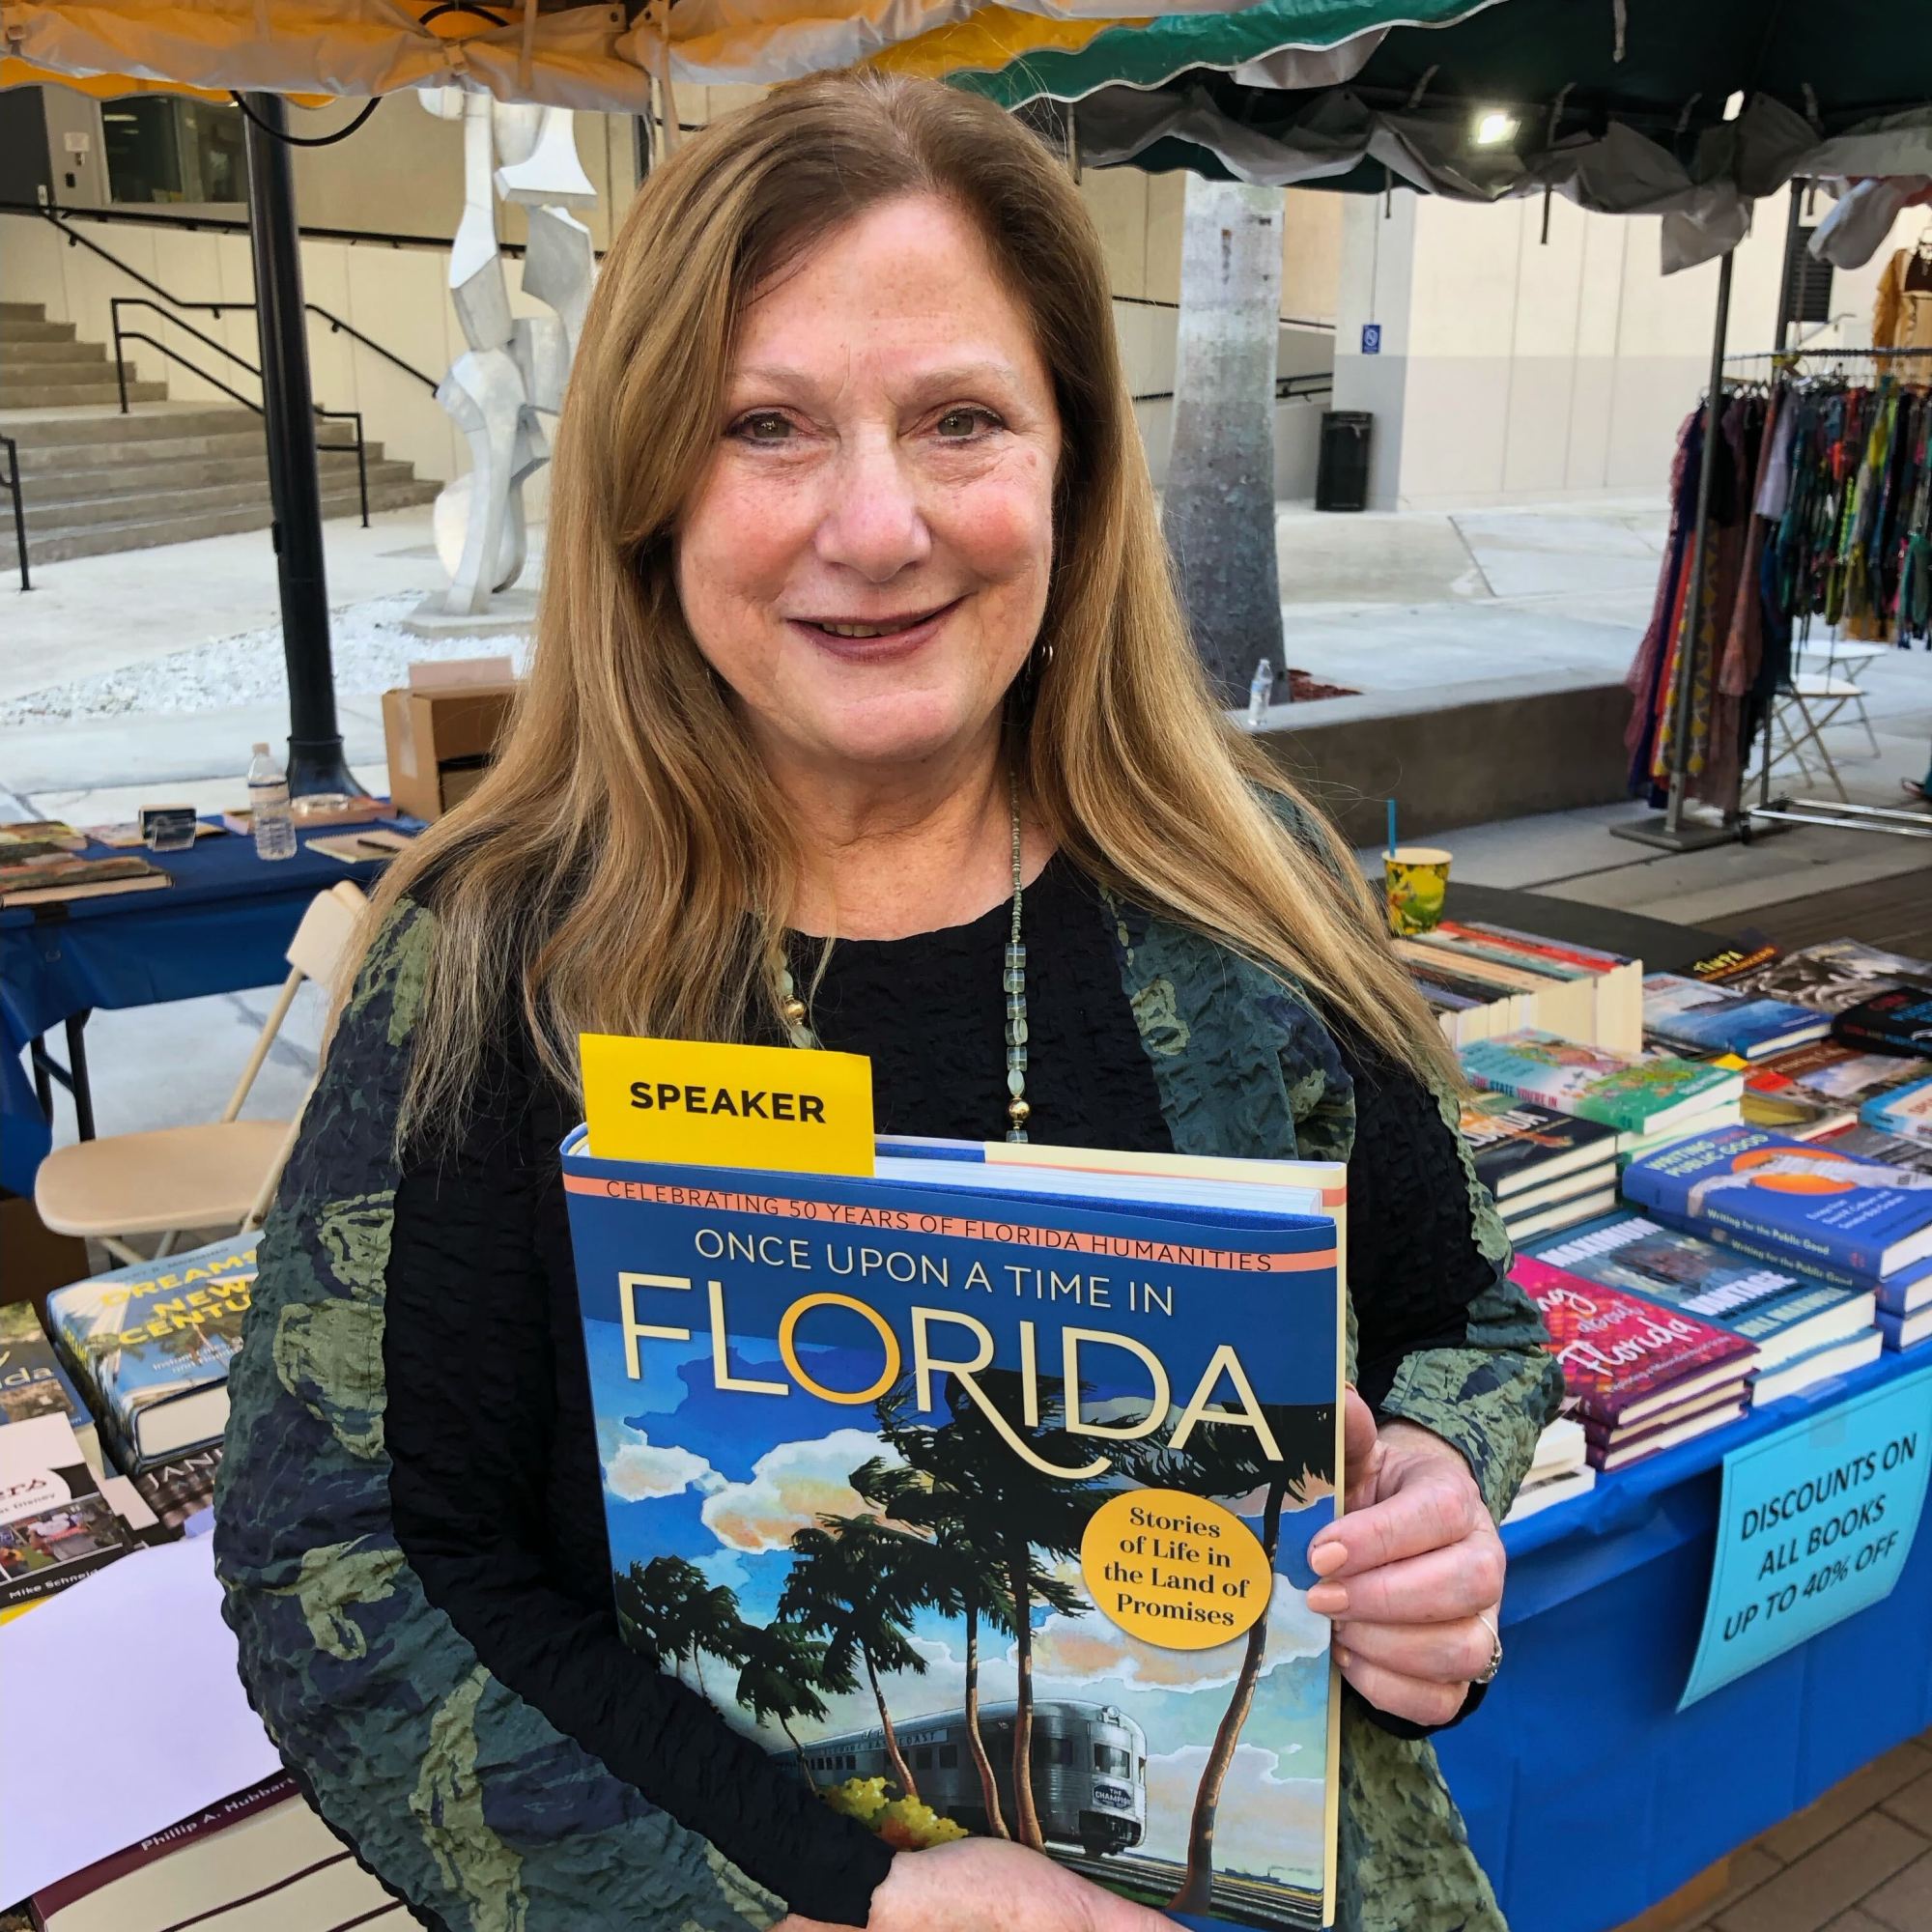 Jacki Levine, editor of Once Upon a Time in Florida: Stories of Life in the Land of Promises (distributed on behalf of Florida Humanities), at the Miami Book Fair